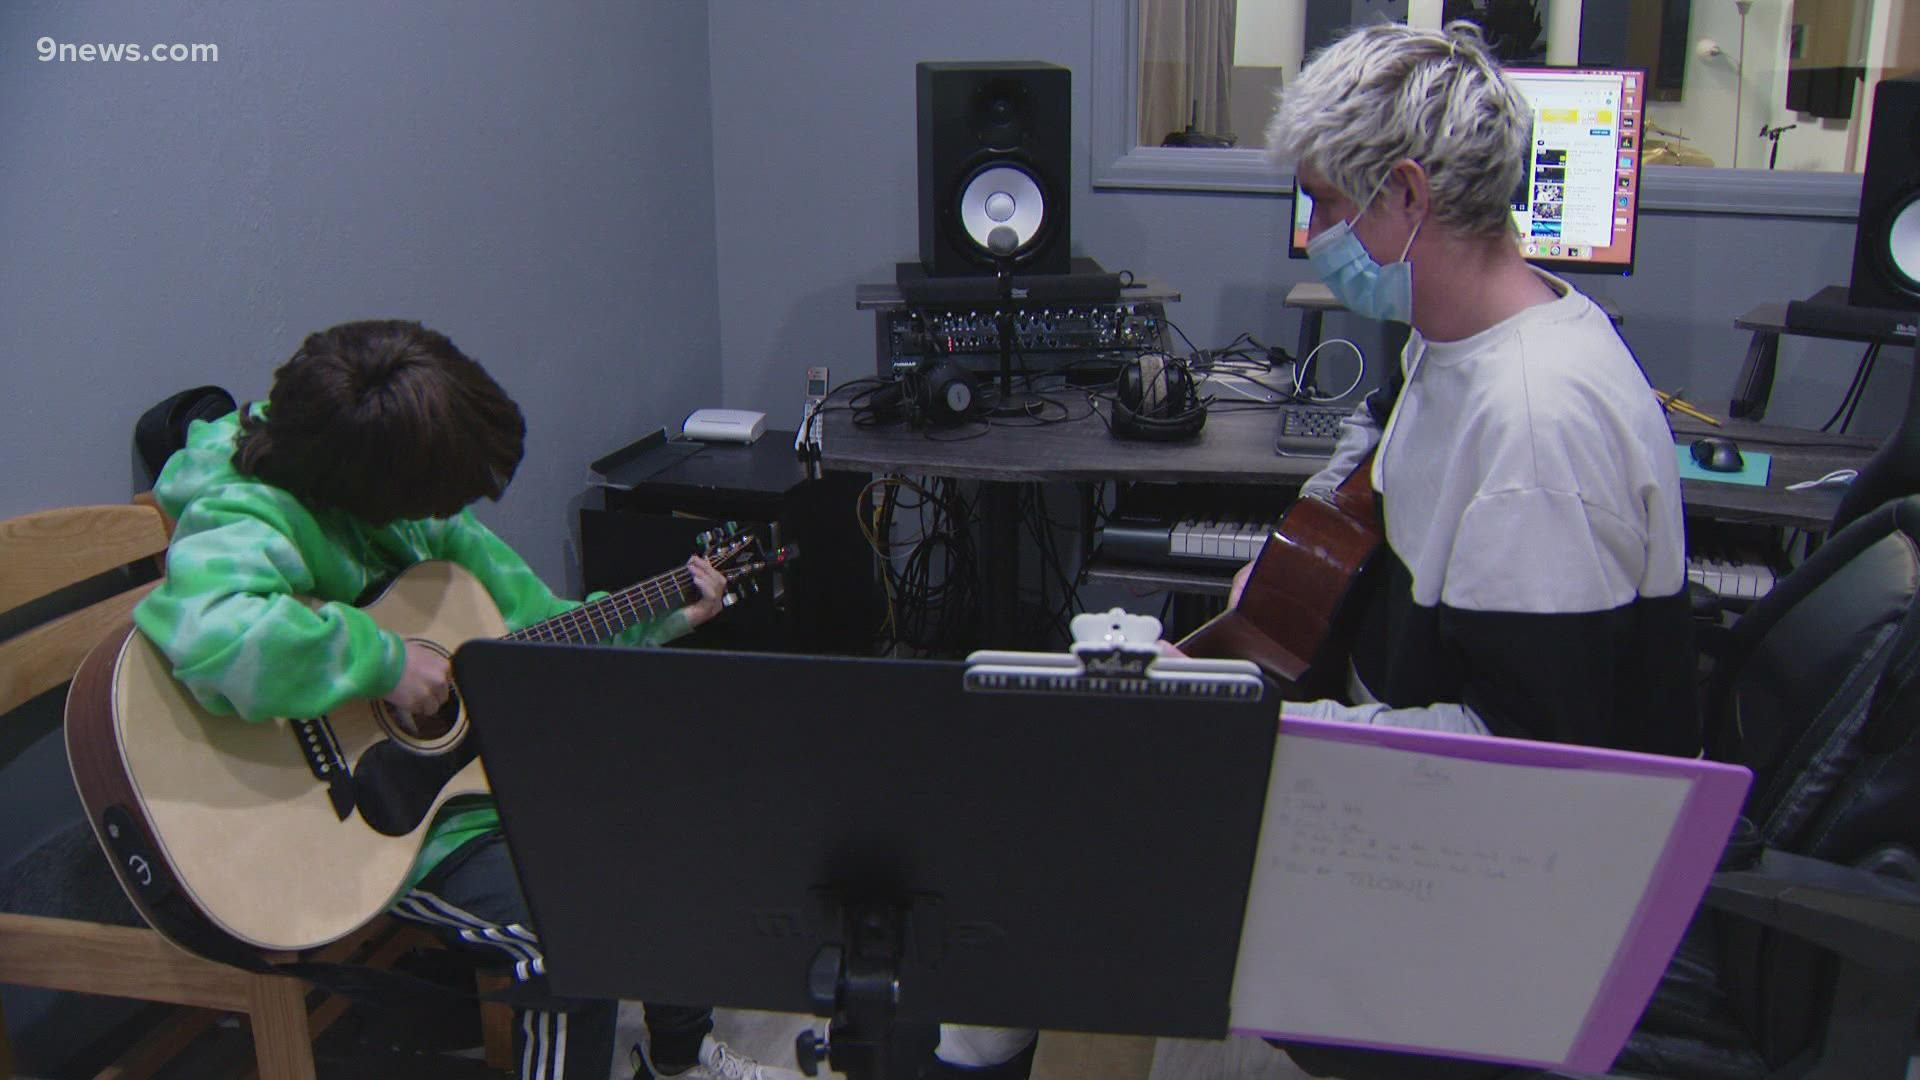 Arvada's Deeply Rooted Music School takes a creative approach to teach students how to write, play and record music they like.